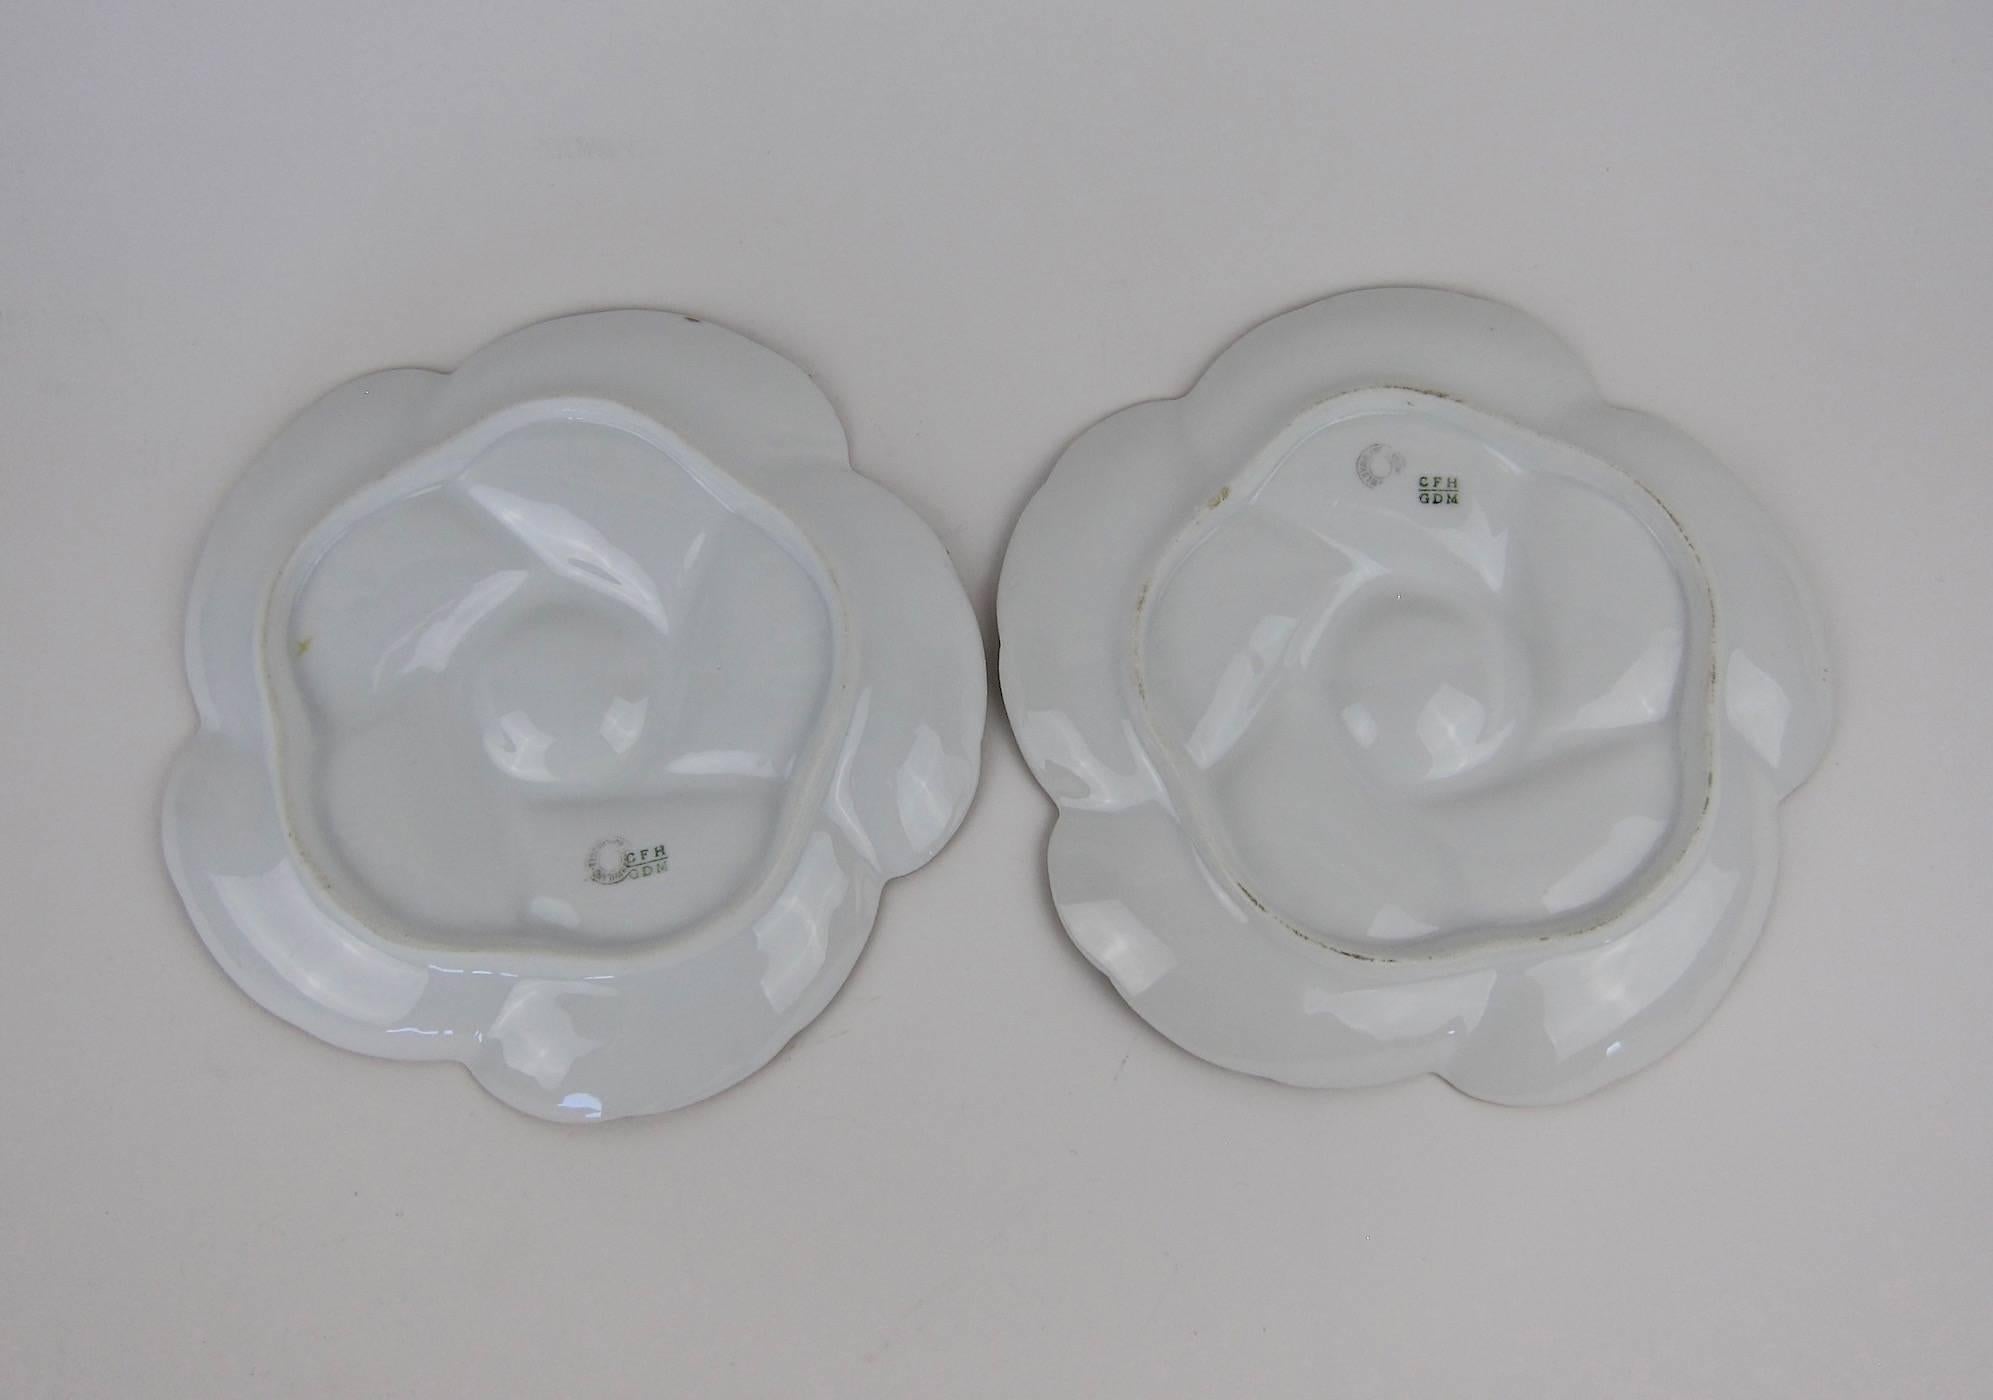 French Antique Limoges Porcelain Oyster Plates by CFH / GDM, 1880s